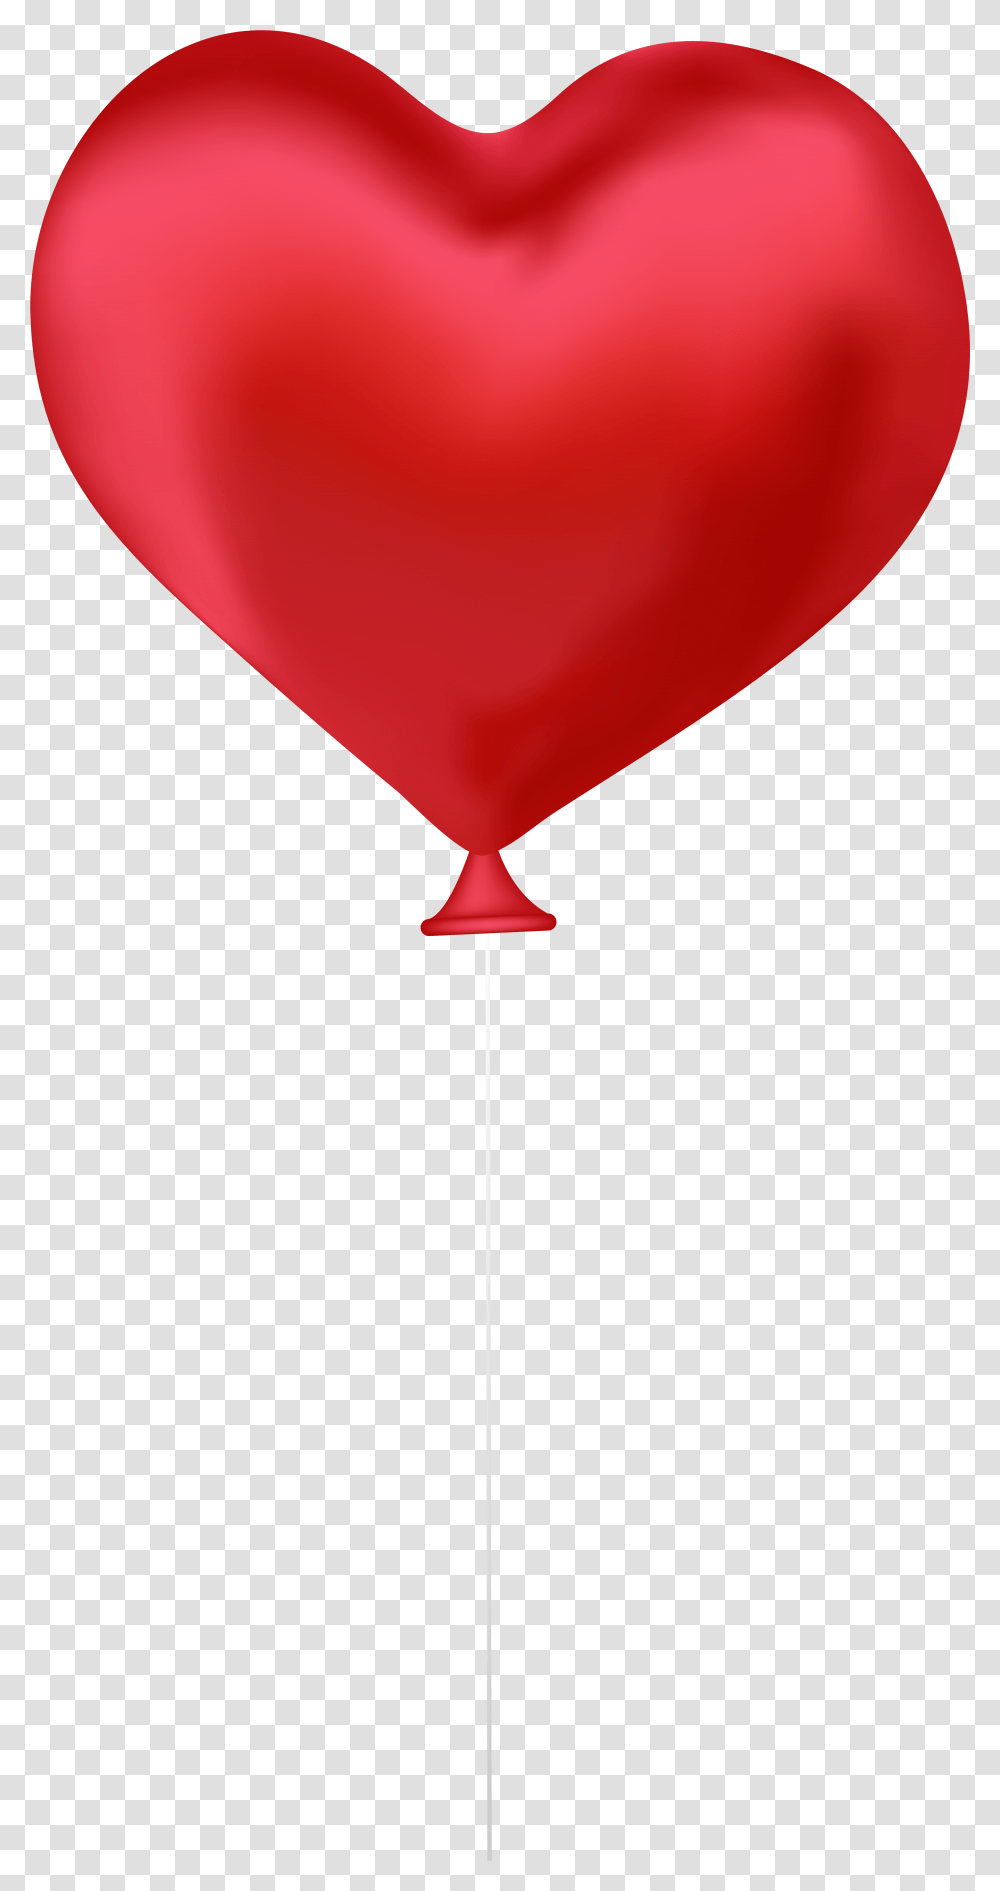 Red Heart Balloon Clip Art Image Red Heart Balloon, Lamp Transparent Png